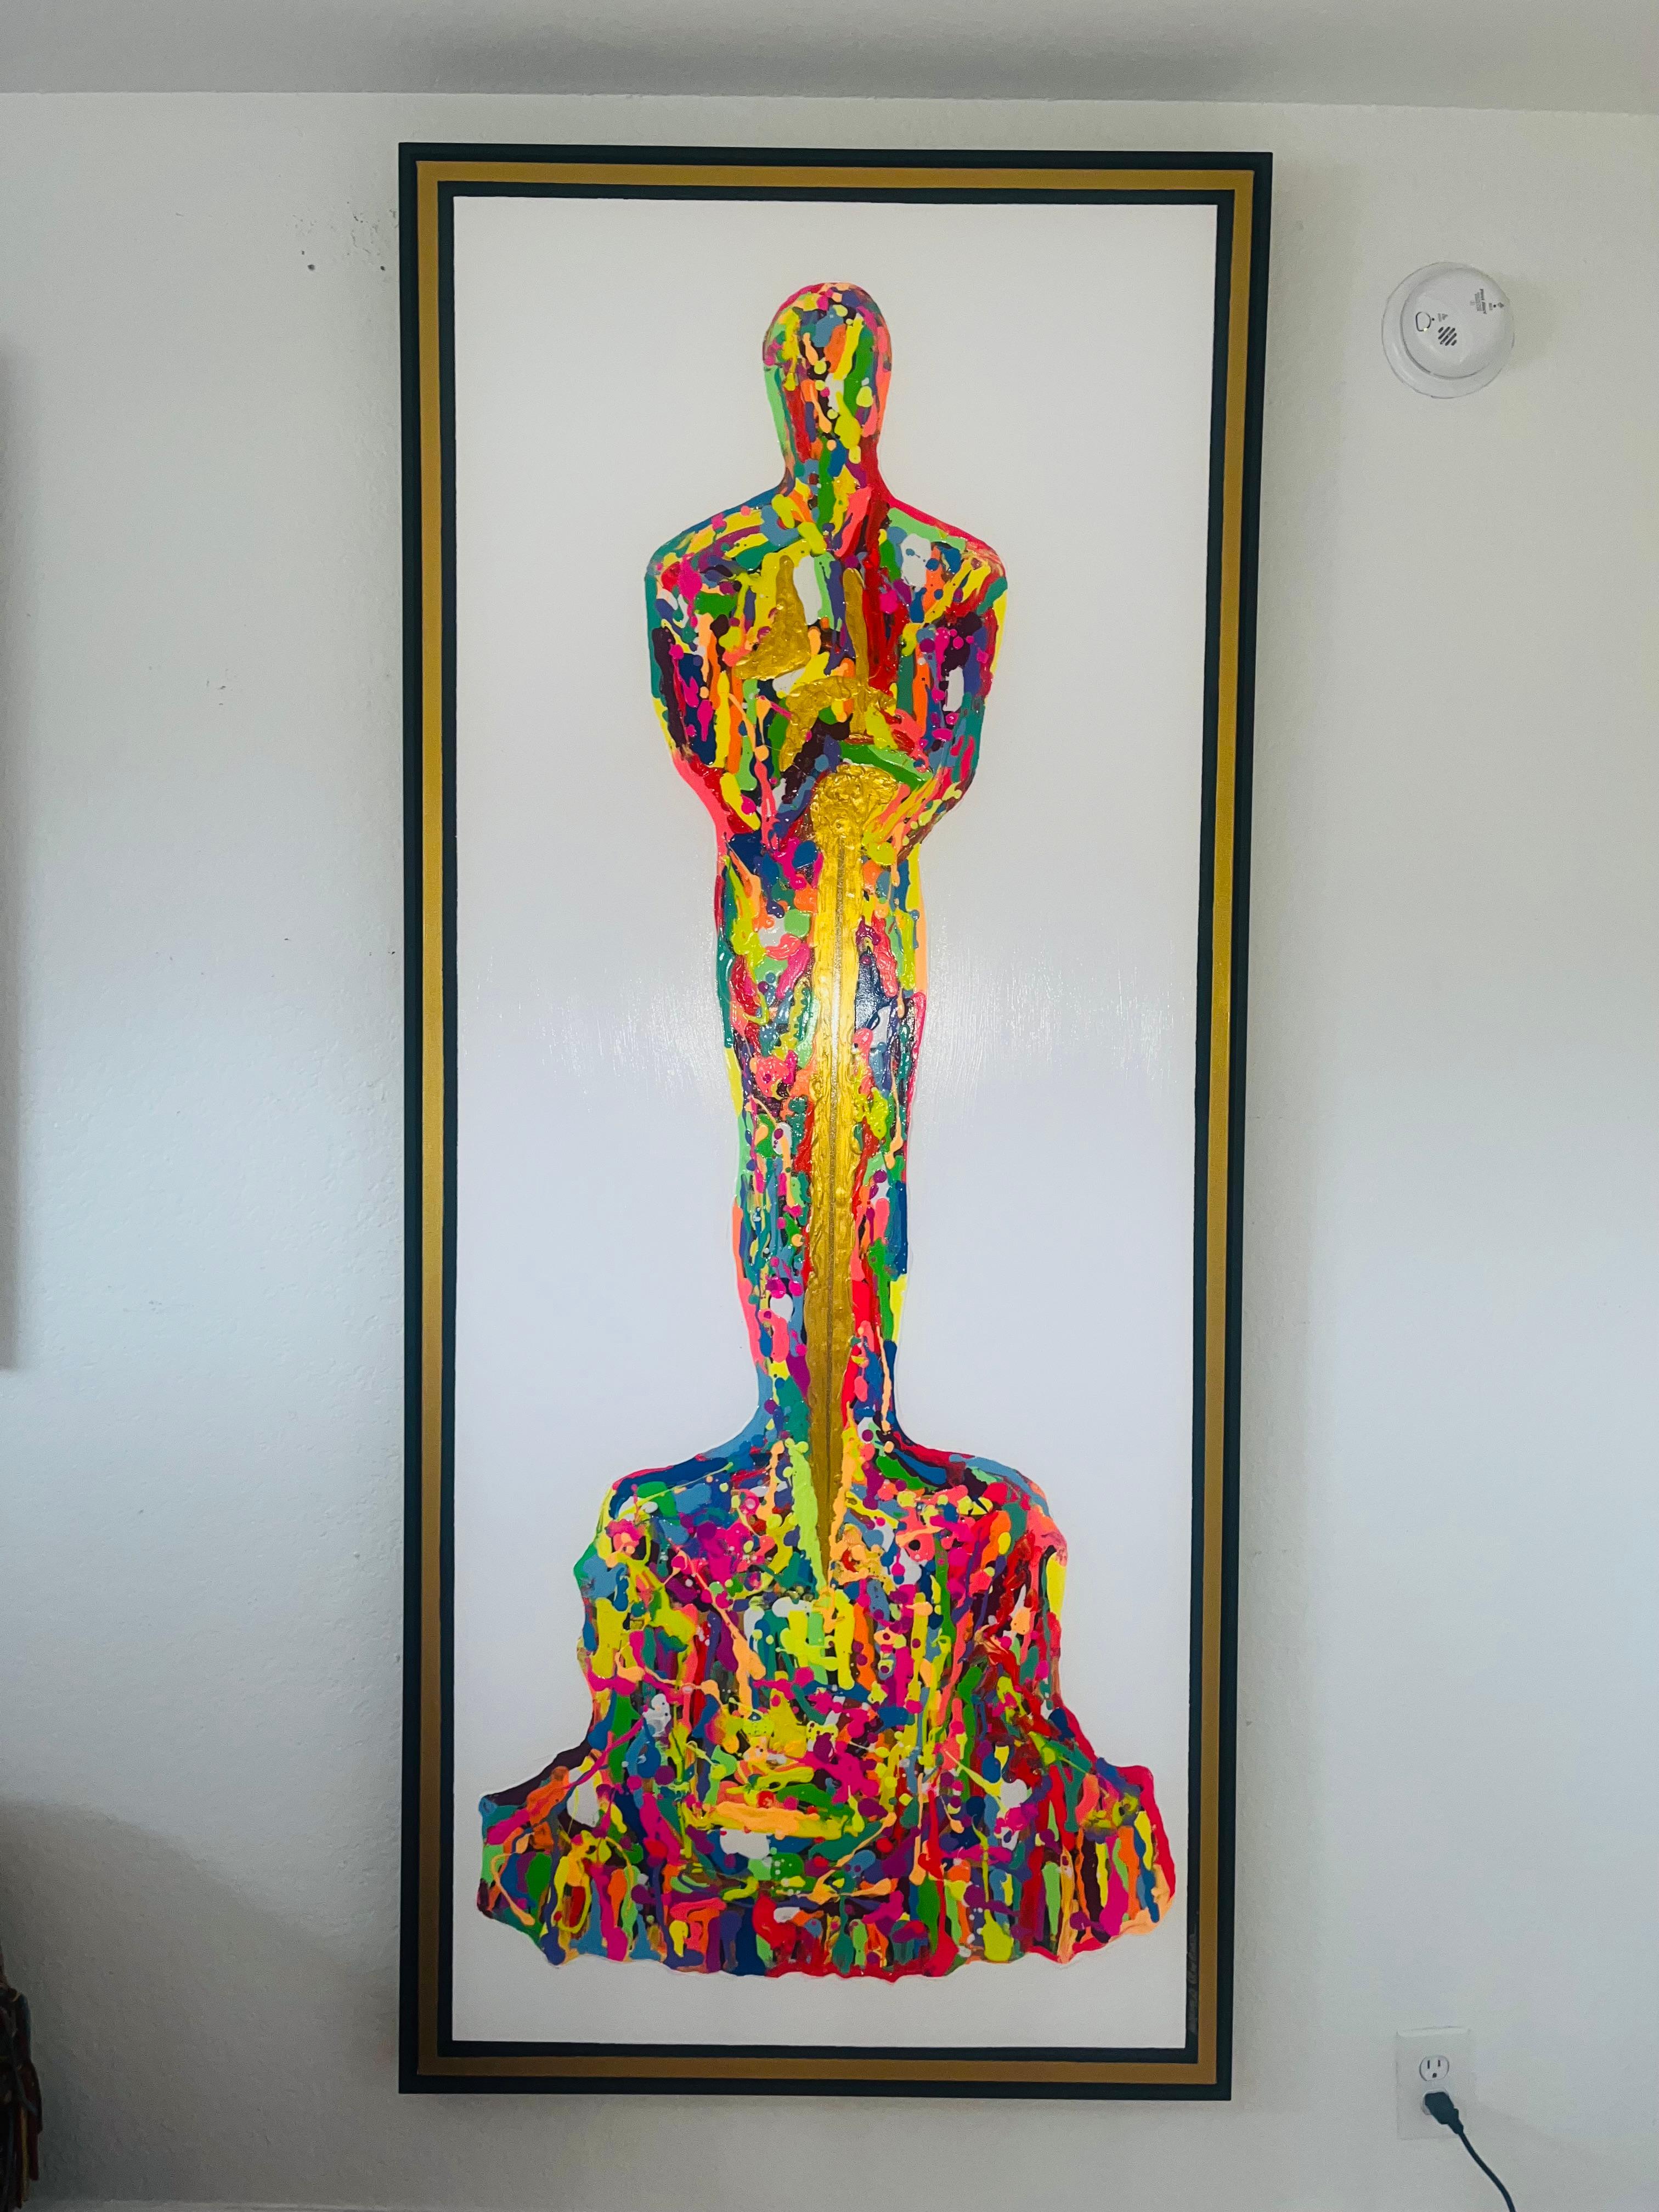                  **ANNUAL SUPER SALE TIL MAY 15th ONLY**
*This Price Won't Be Repeated Again This Year - Take Advantage Of It*

The last piece of the limited and original Oscar Statue art series by Mauro Oliveira. Neon paint over canvas covered with